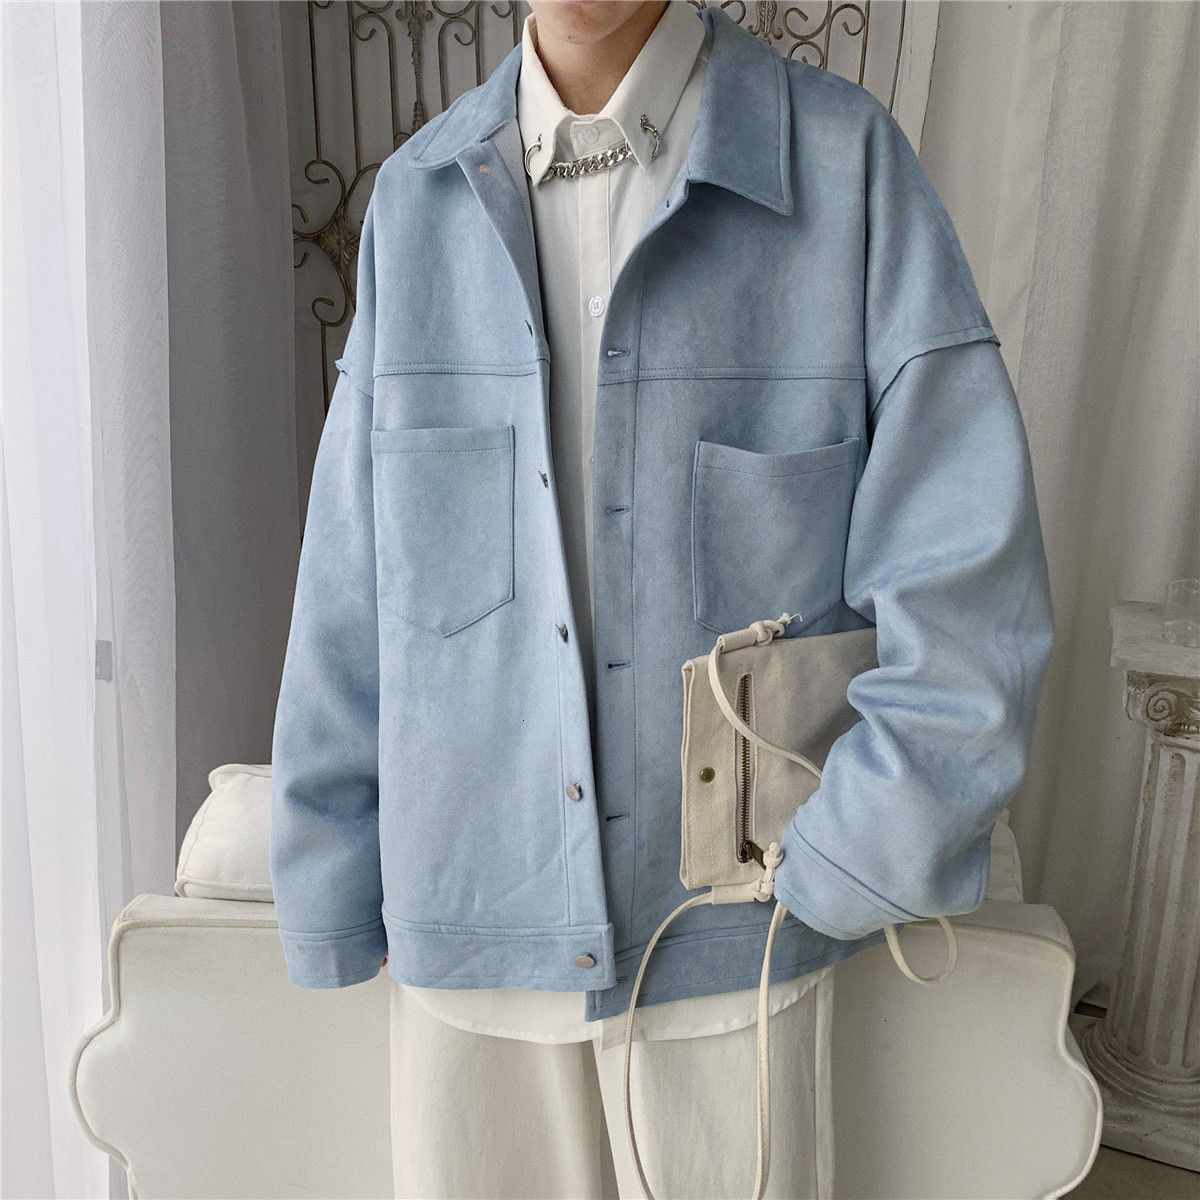 Voguable Privathinker Men's Solid Oversized Suede Jackets Korean Style Men Casual Loose Coats 2021 Autumn New Men's Fashion Outerwear voguable